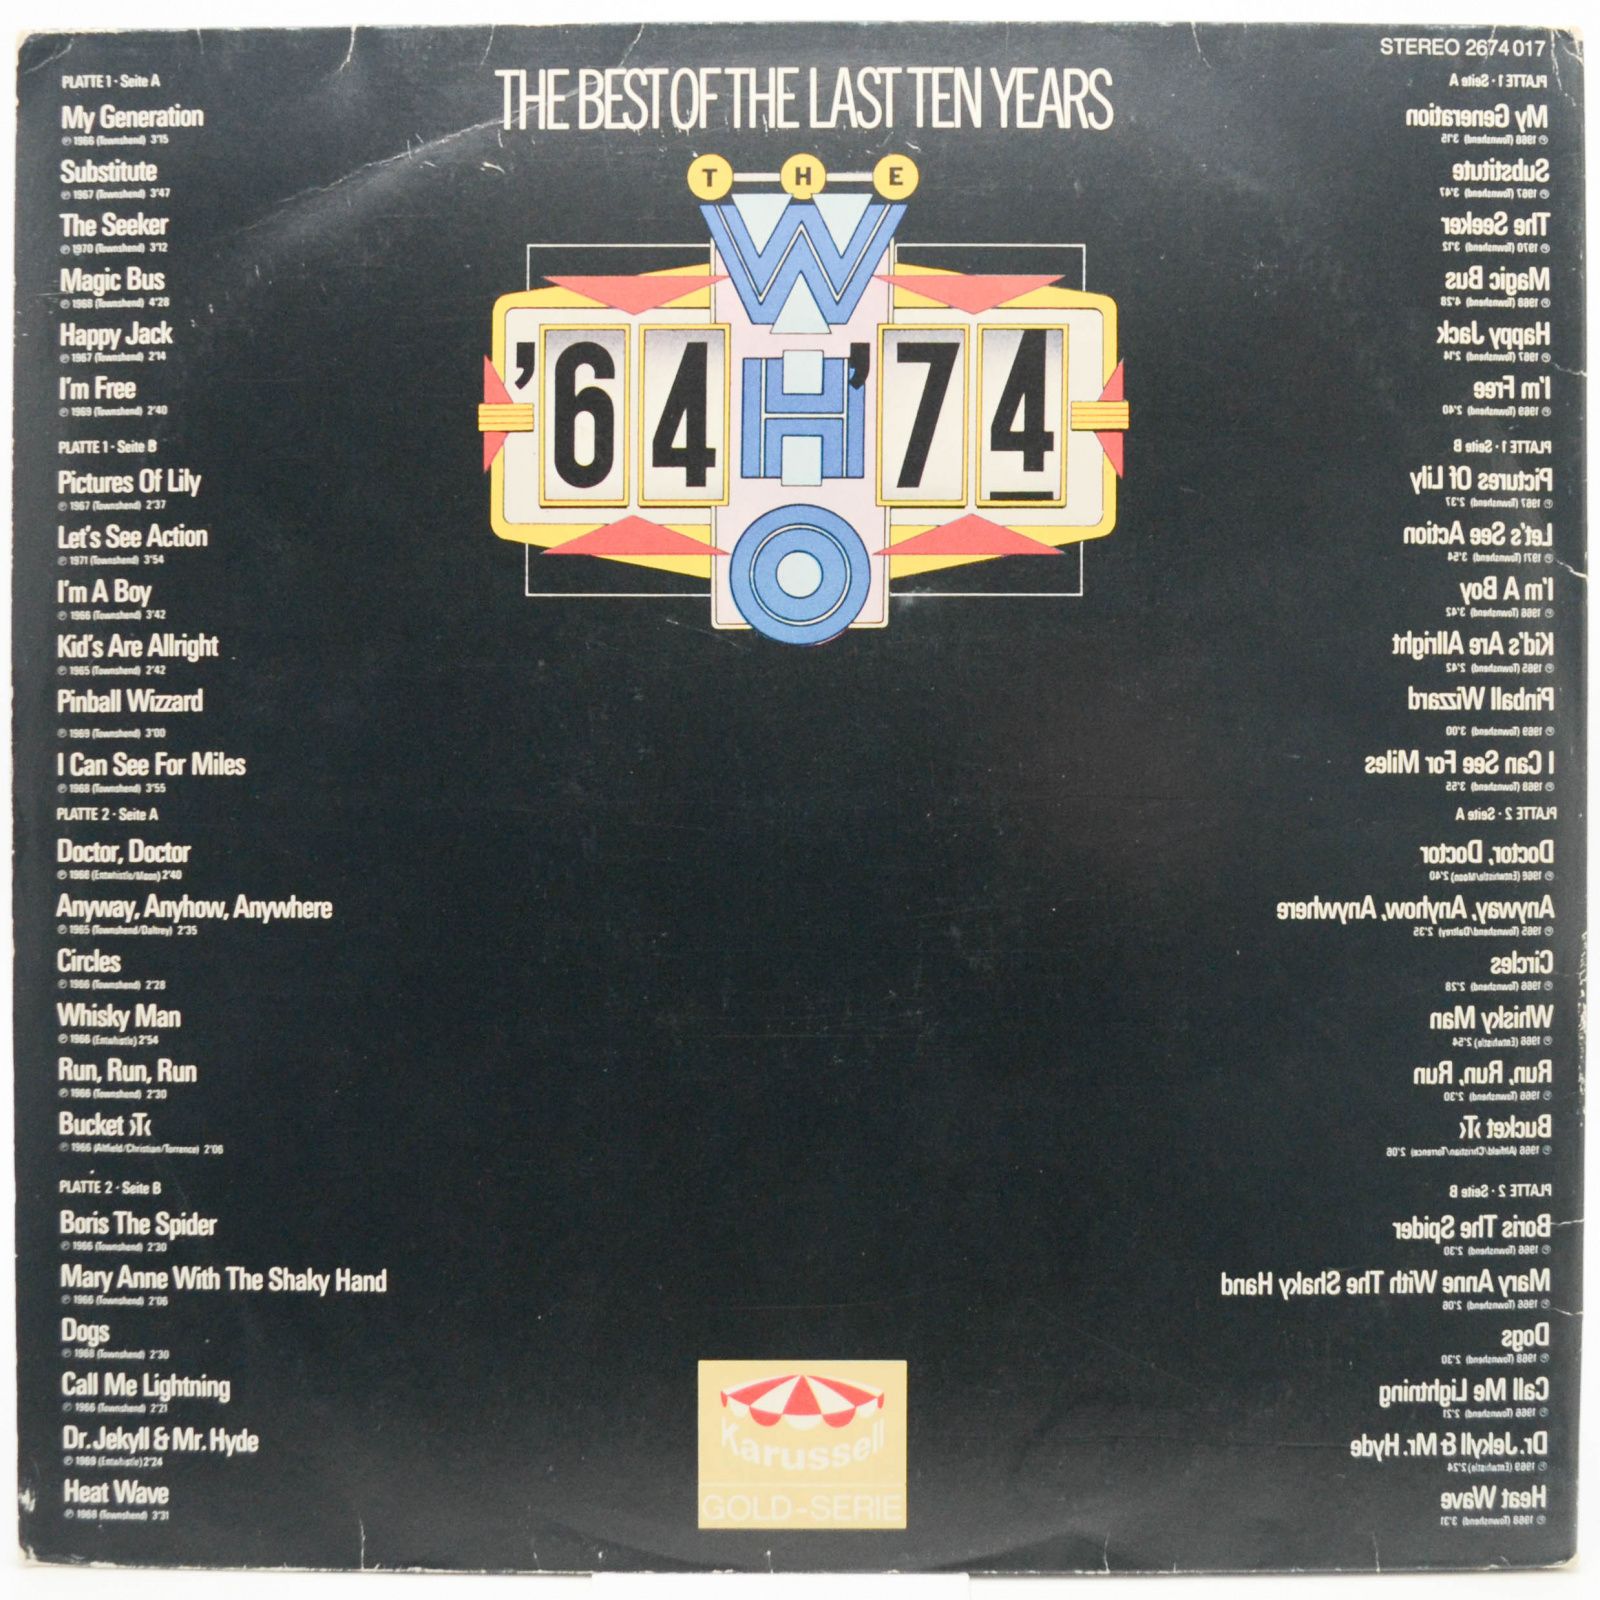 Who — 64 - '74 / The Best Of The Last Ten Years (2LP), 1975